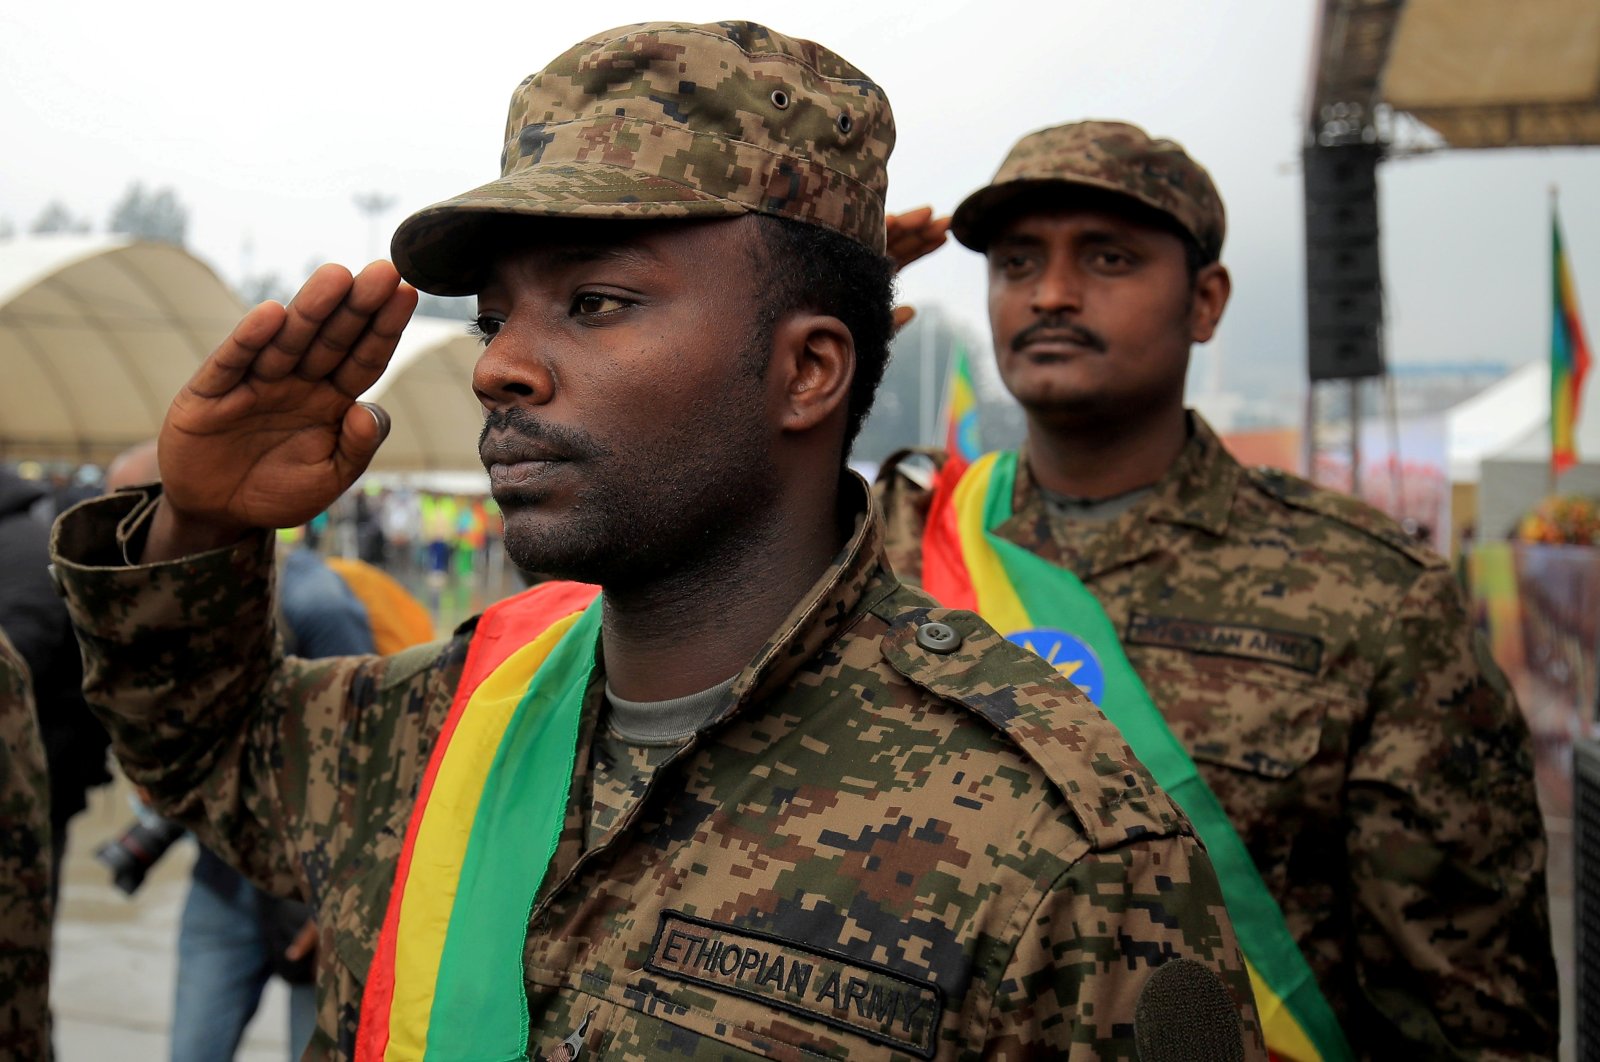 Members of the National Defense Force attend farewell ceremony for recruits joining Ethiopia's Defense Force at Meskel Square in Addis Ababa, Ethiopia July 27, 2021. (REUTERS Photo)